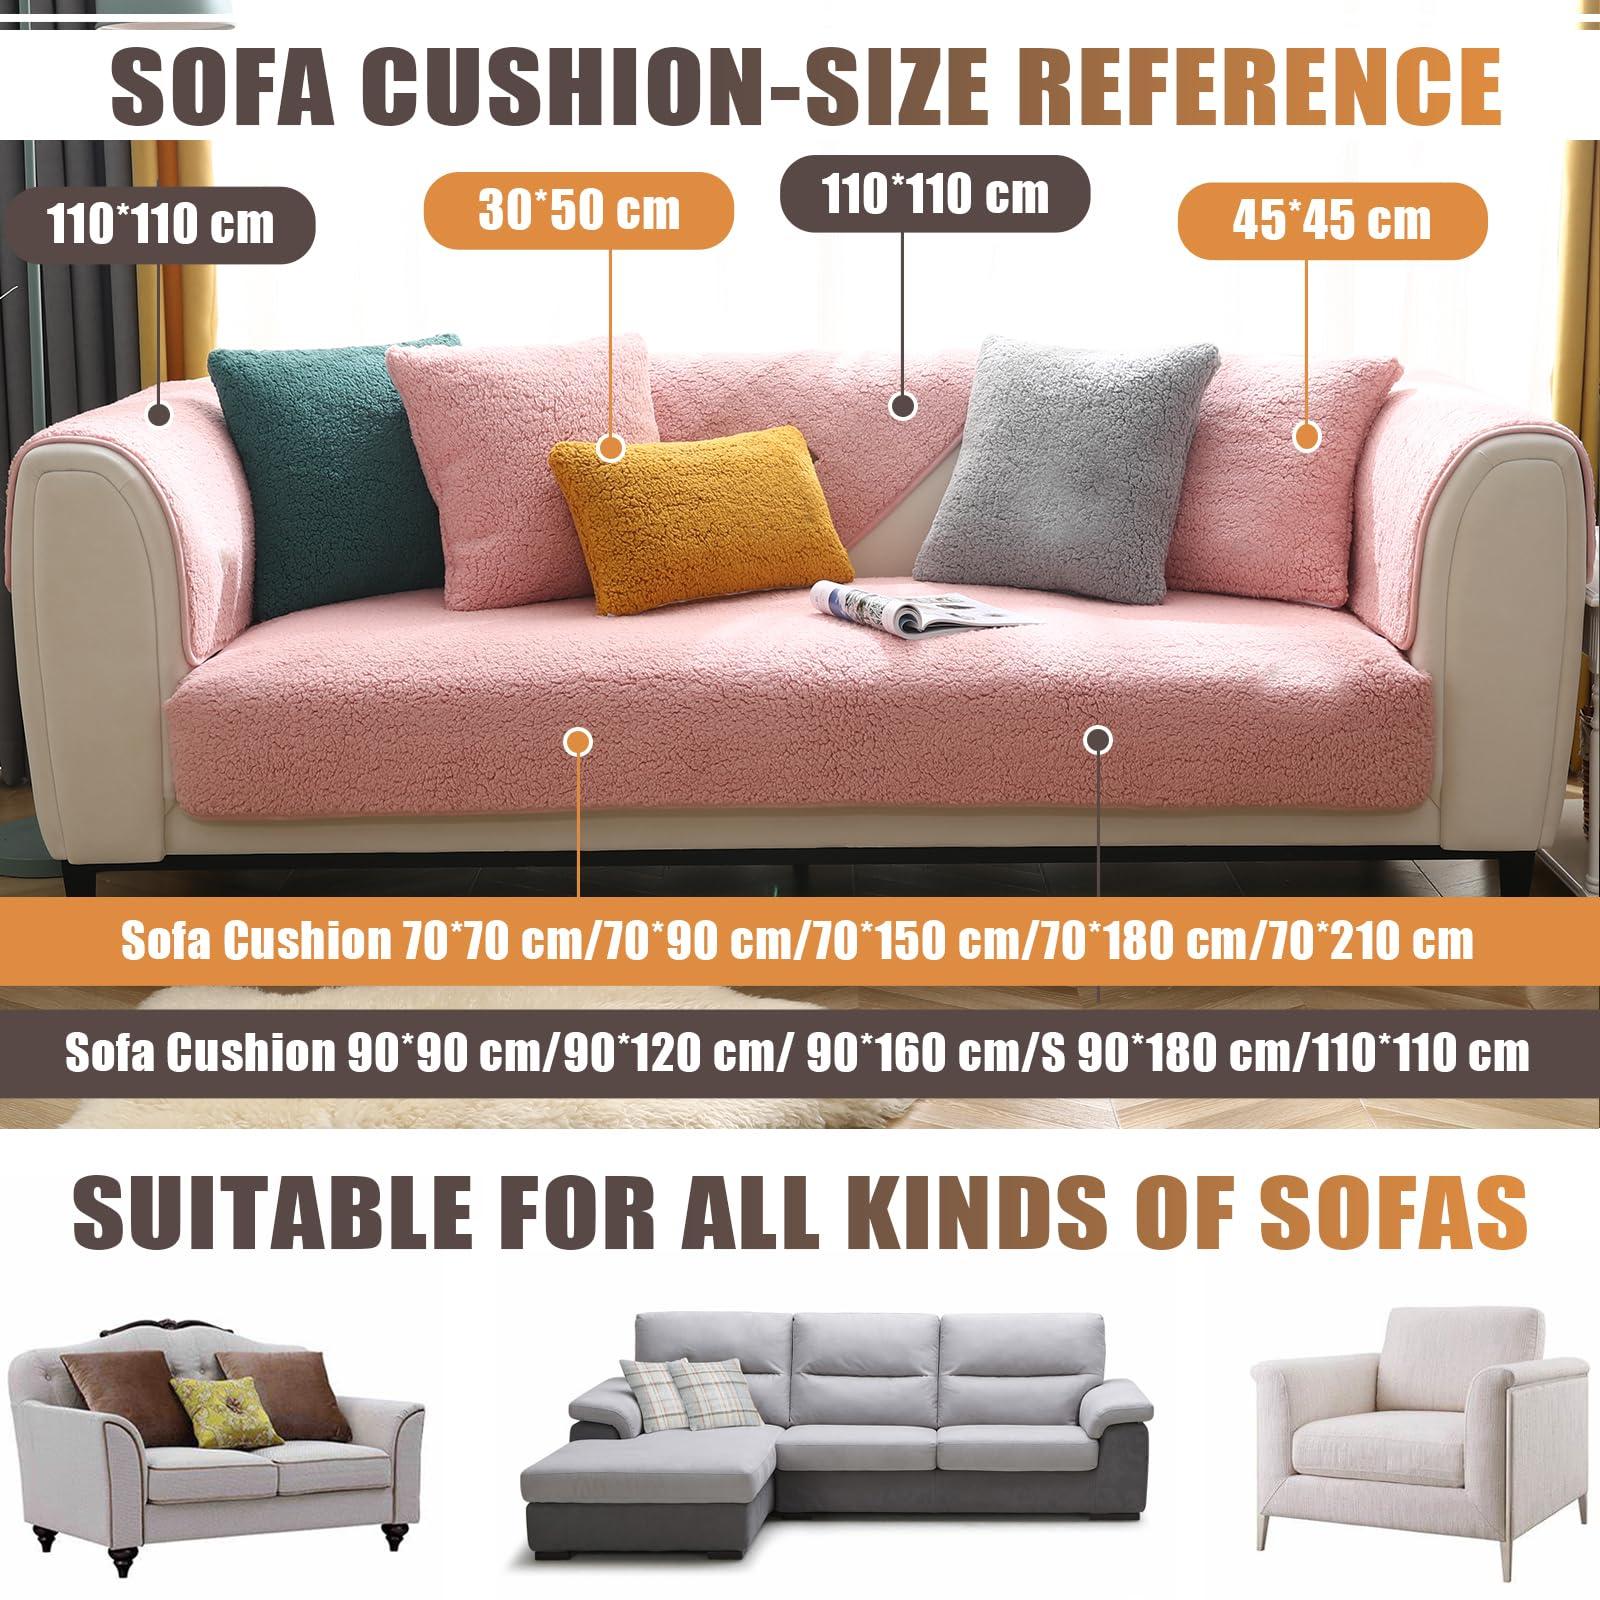 LiveGo Premium Velet Sofa Covers, Non-slip Sofa Slipcovers, Elaborate and Exquisite Couch Covers, Sofa Cushion Covers for Bedroom, Hotel and Office 2